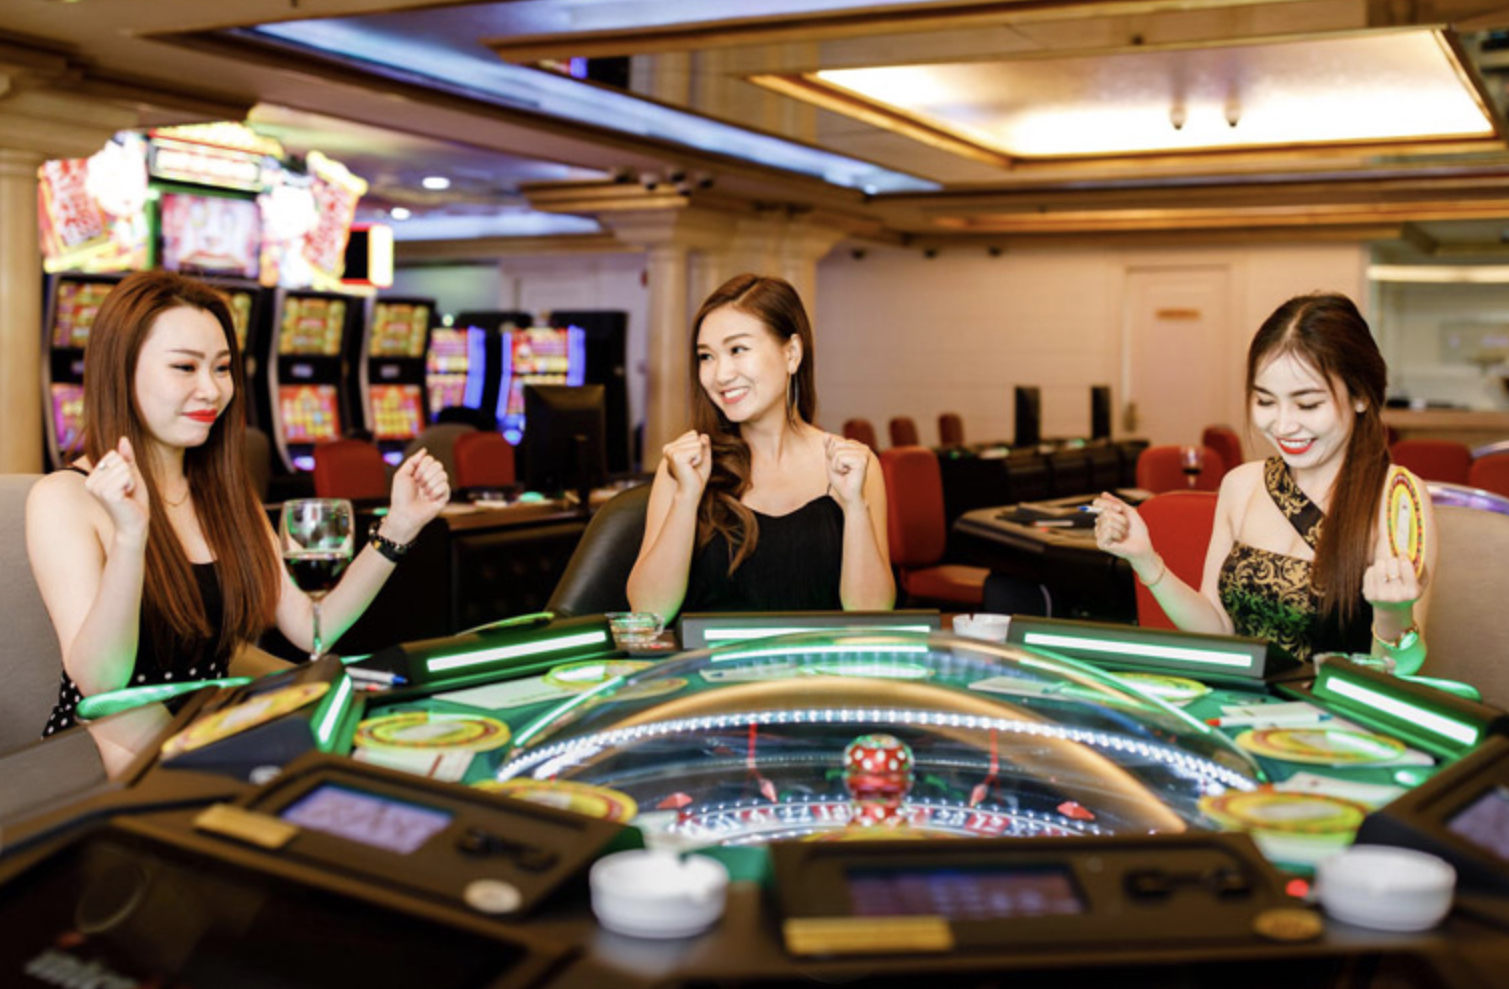 About welcome bonuses at online casinos